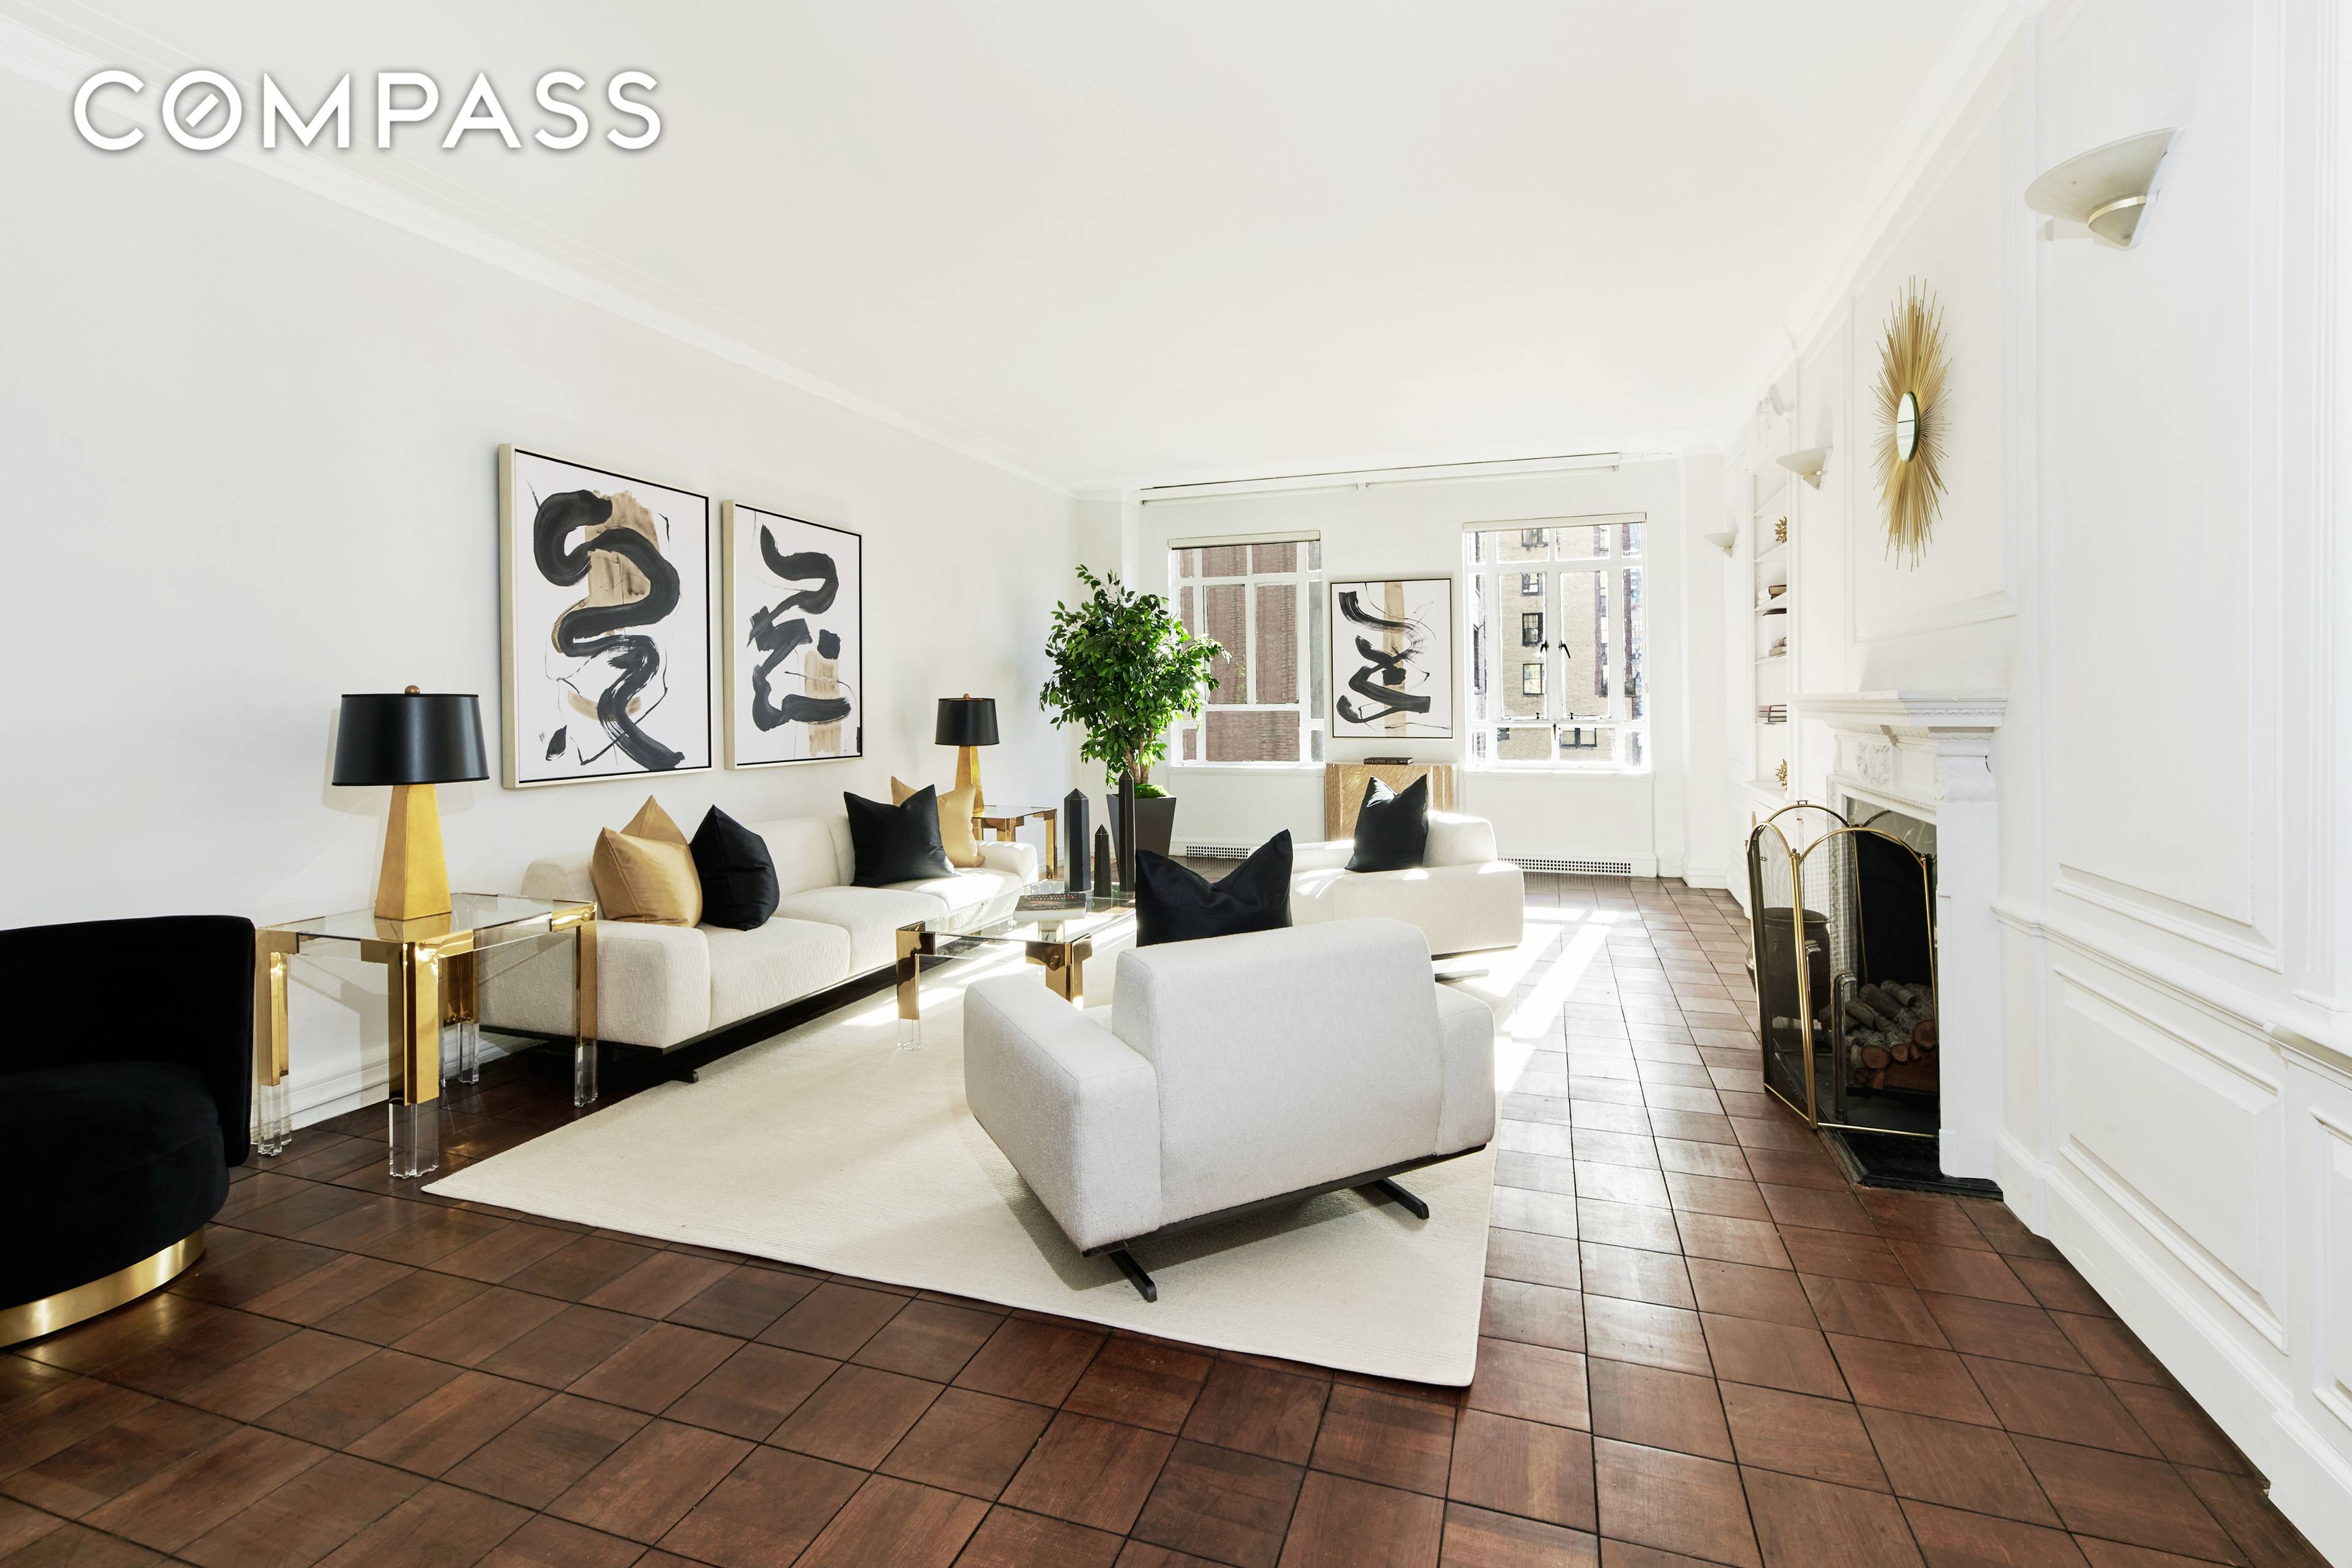 3 4 BR, 9B AT 115 CPW THE MAJESTIC This sunny pre war Classic 8 room, 3 4 bedroom, four bath, is in the Majestic, one of Central Park West ...